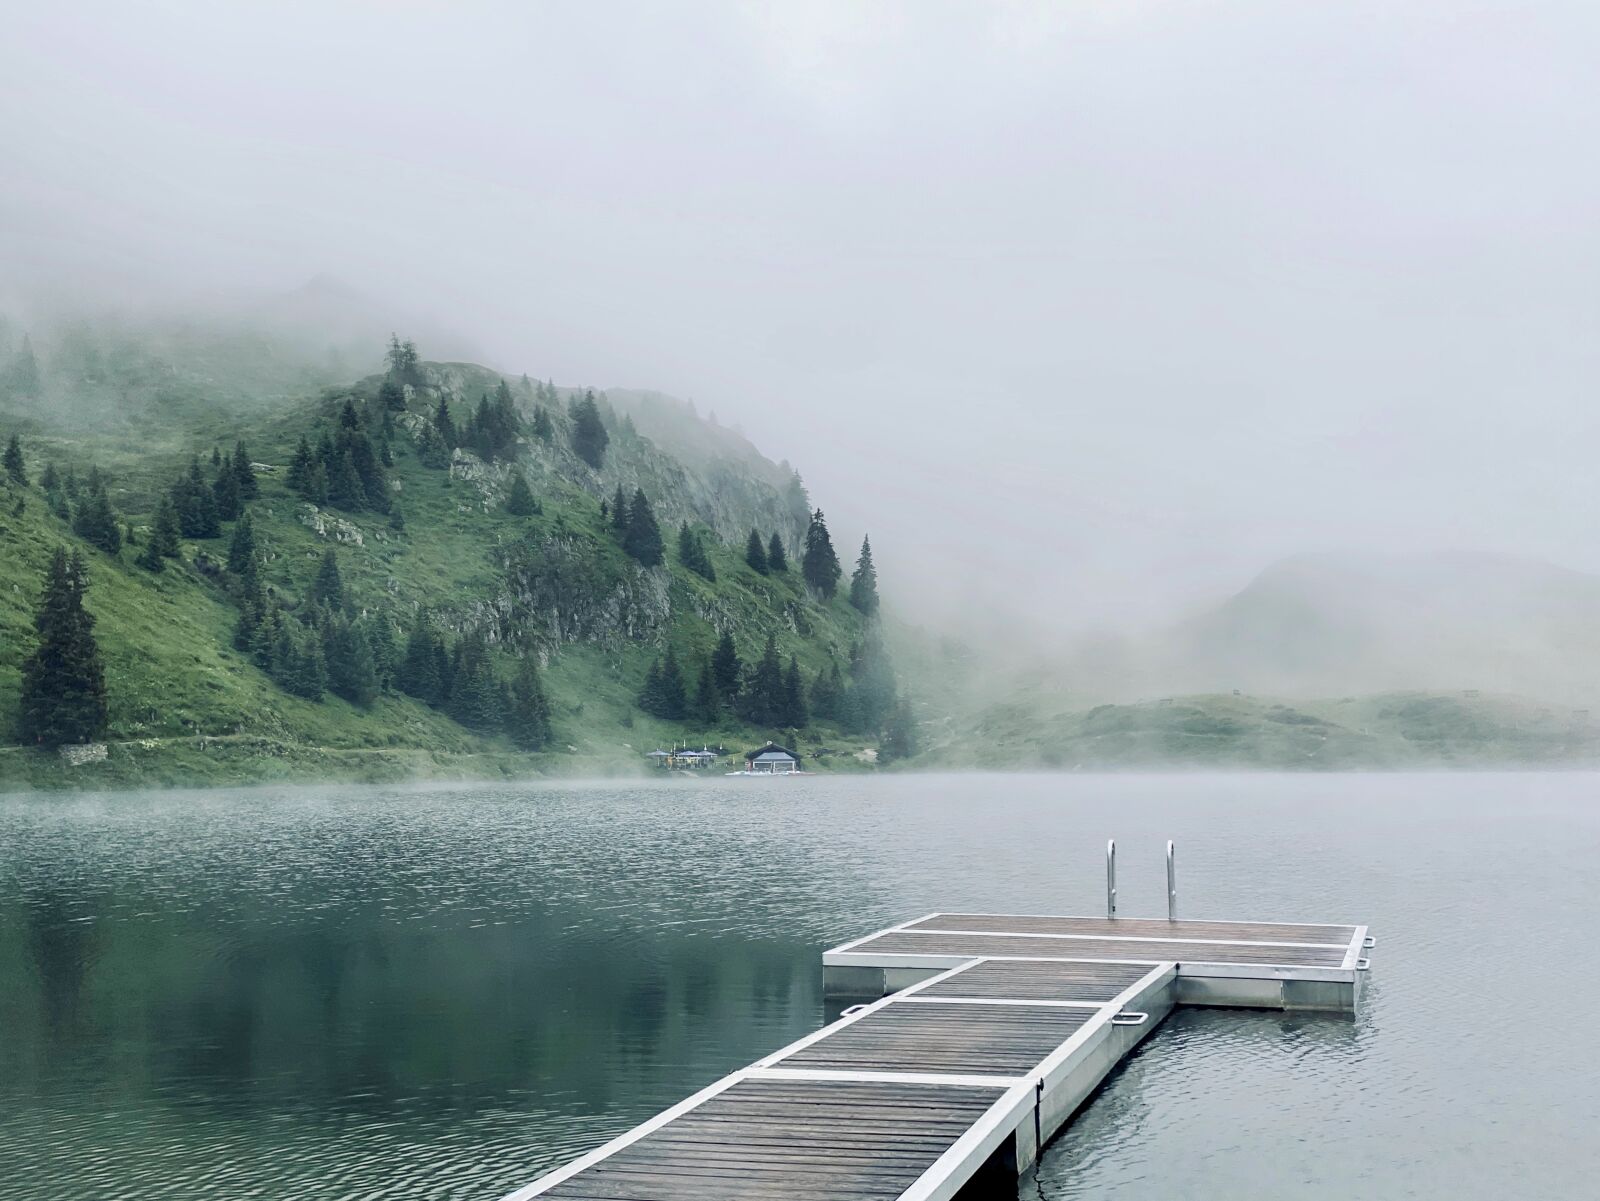 Apple iPhone 11 Pro Max + iPhone 11 Pro Max back triple camera 6mm f/2 sample photo. Bergsee, fog, nature photography